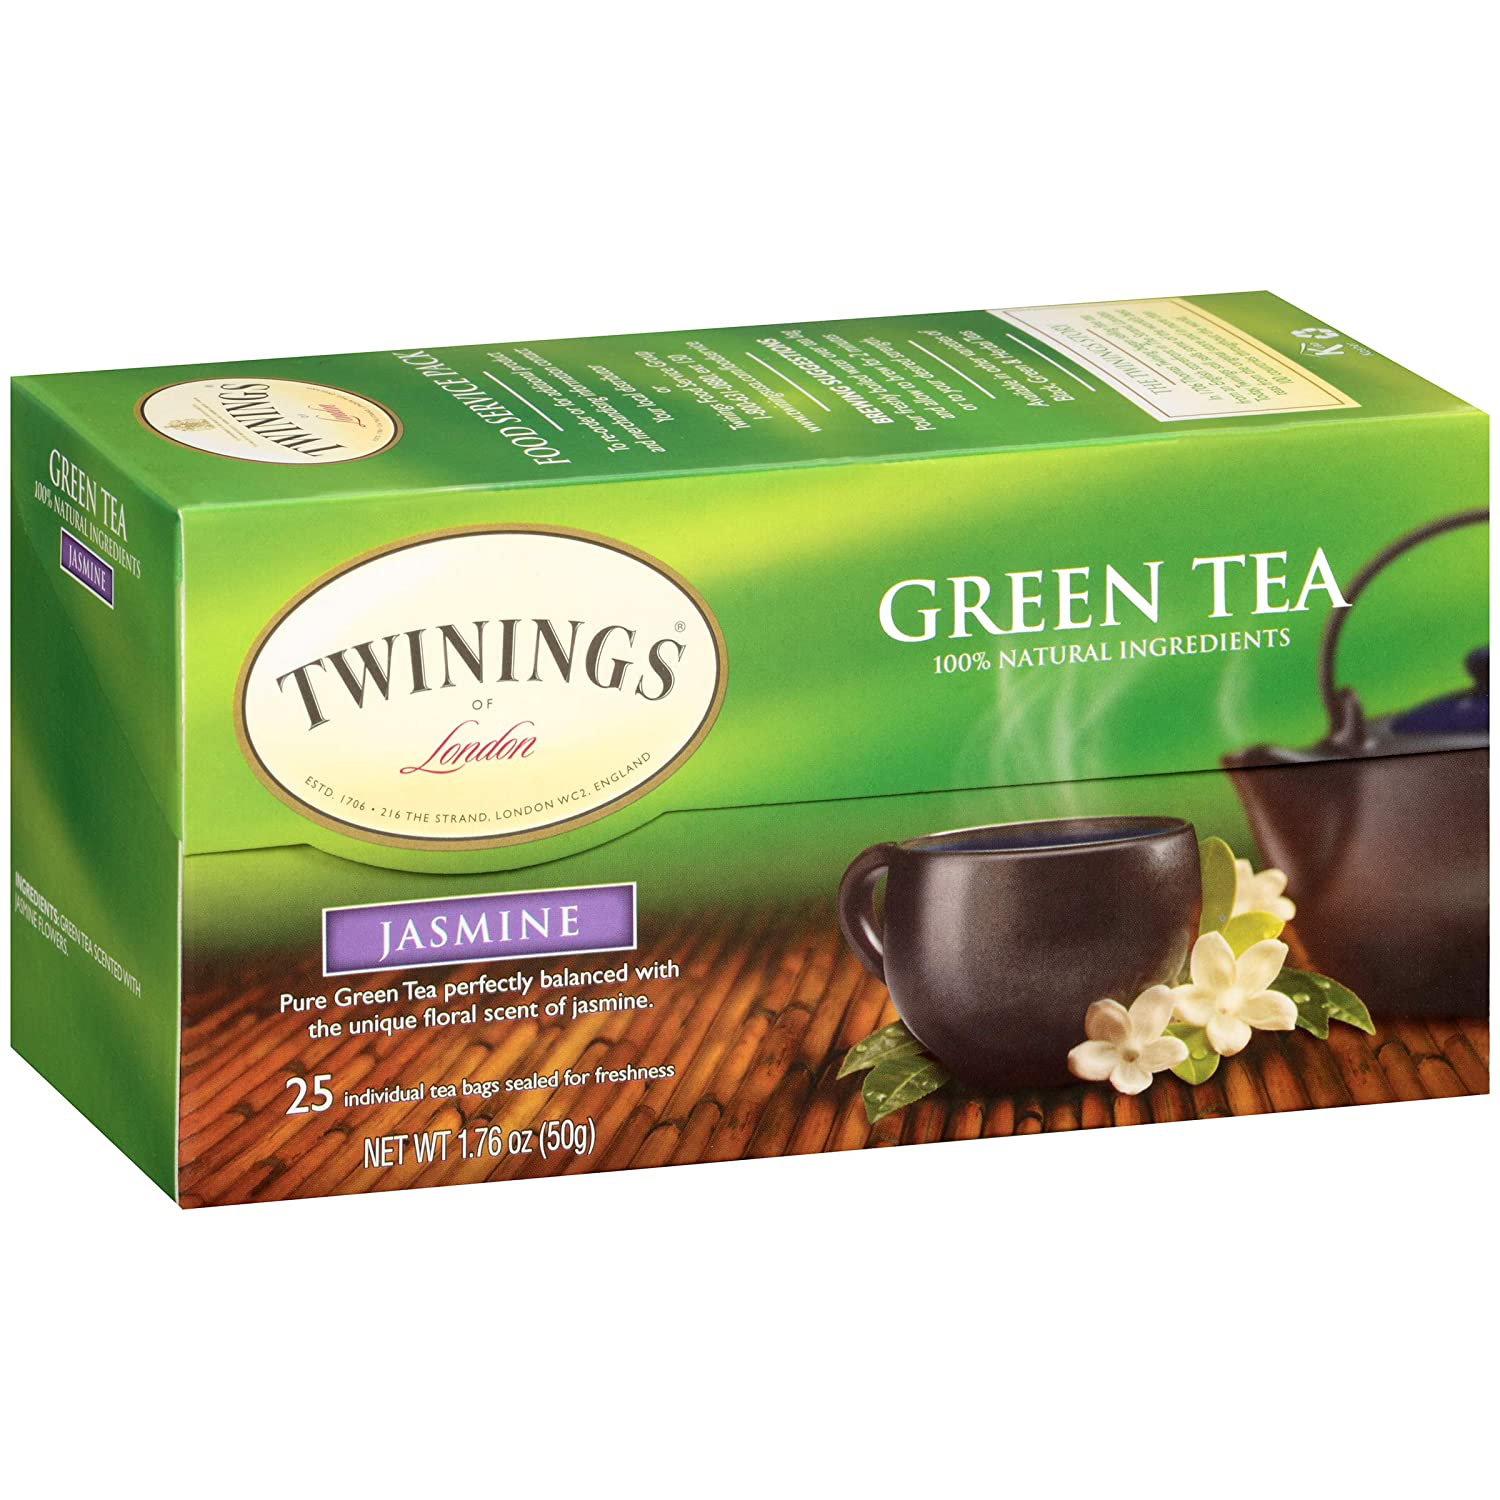 Twinings of London English Afternoon Black Tea Bags, 20 Count (Pack of 6)